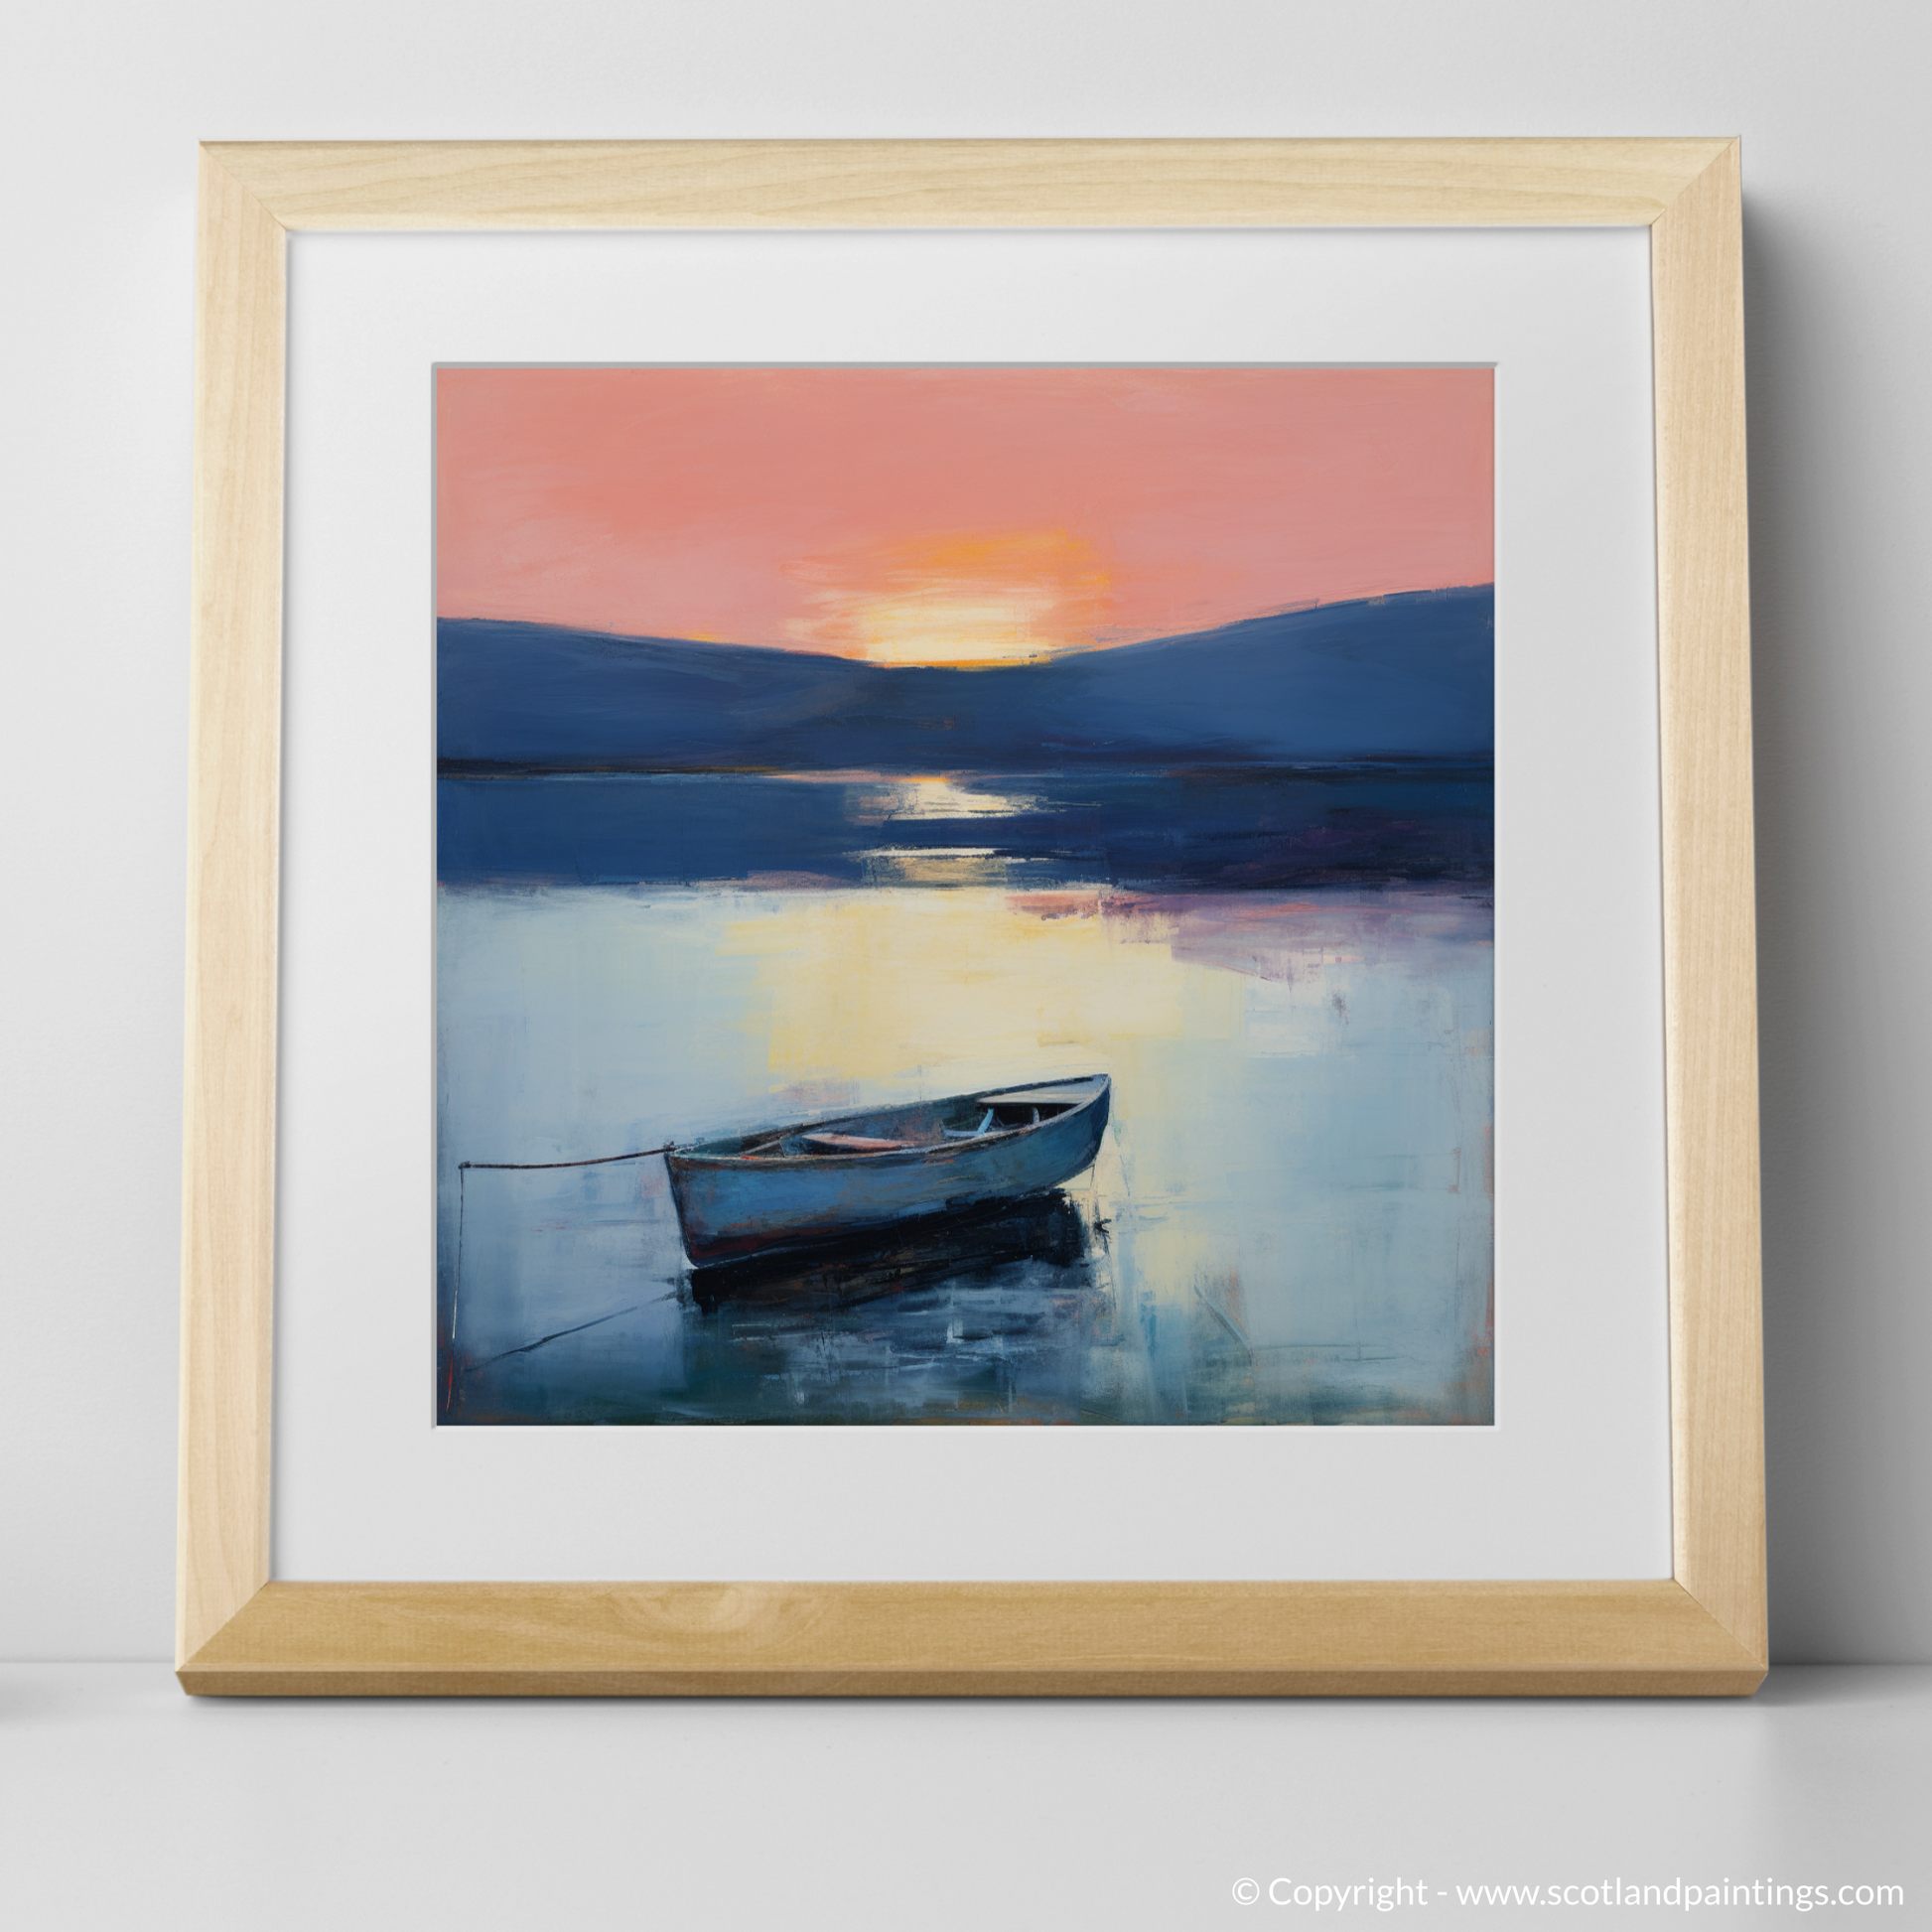 Art Print of Lone rowboat on Loch Lomond at dusk with a natural frame